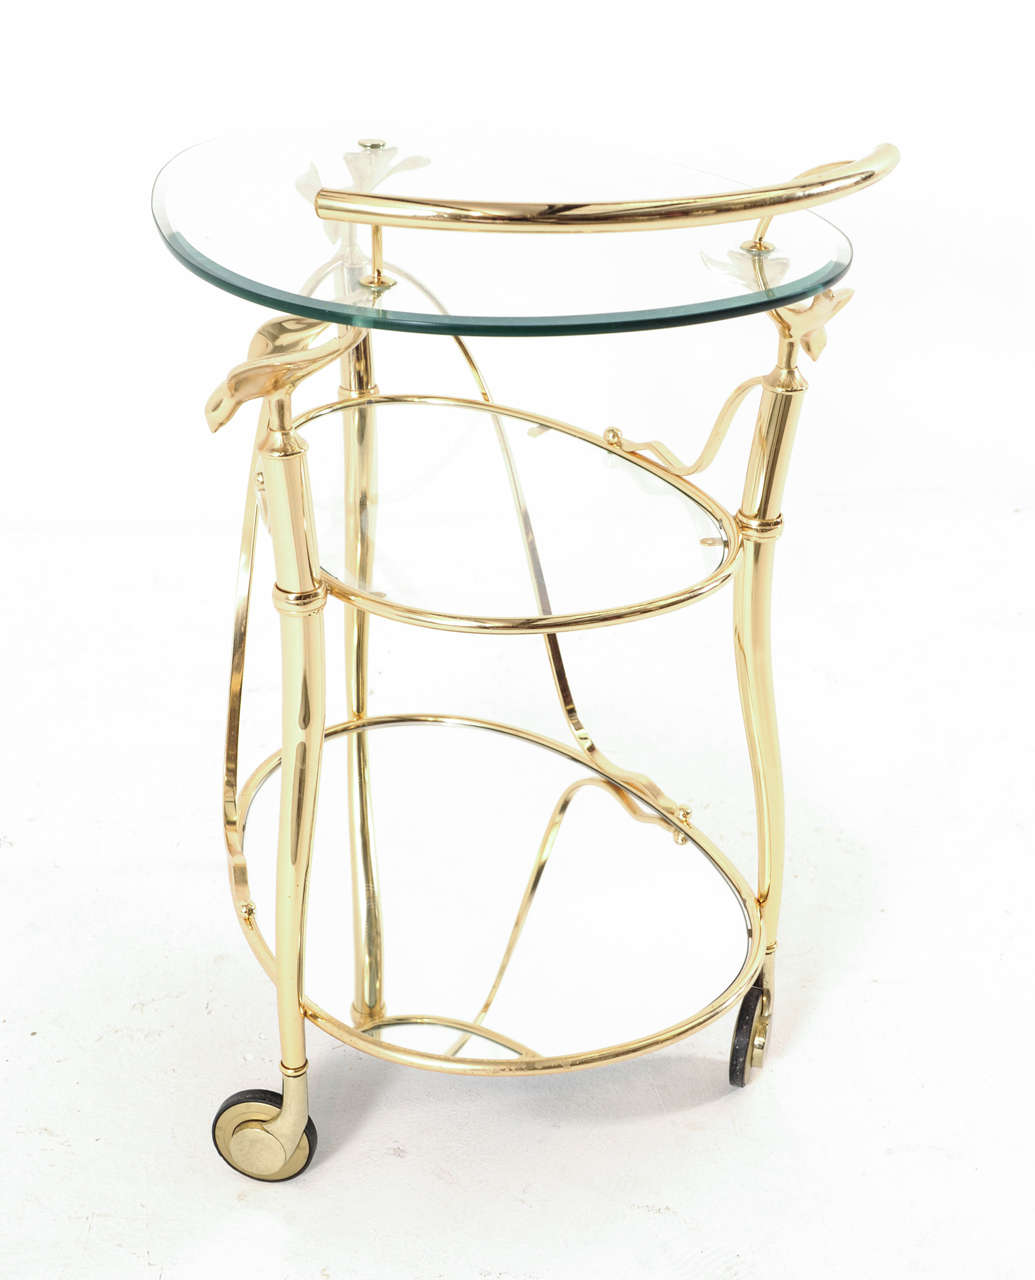 Gilded Bar Cart or Serving Trolley with Three Levels on Wheels 1